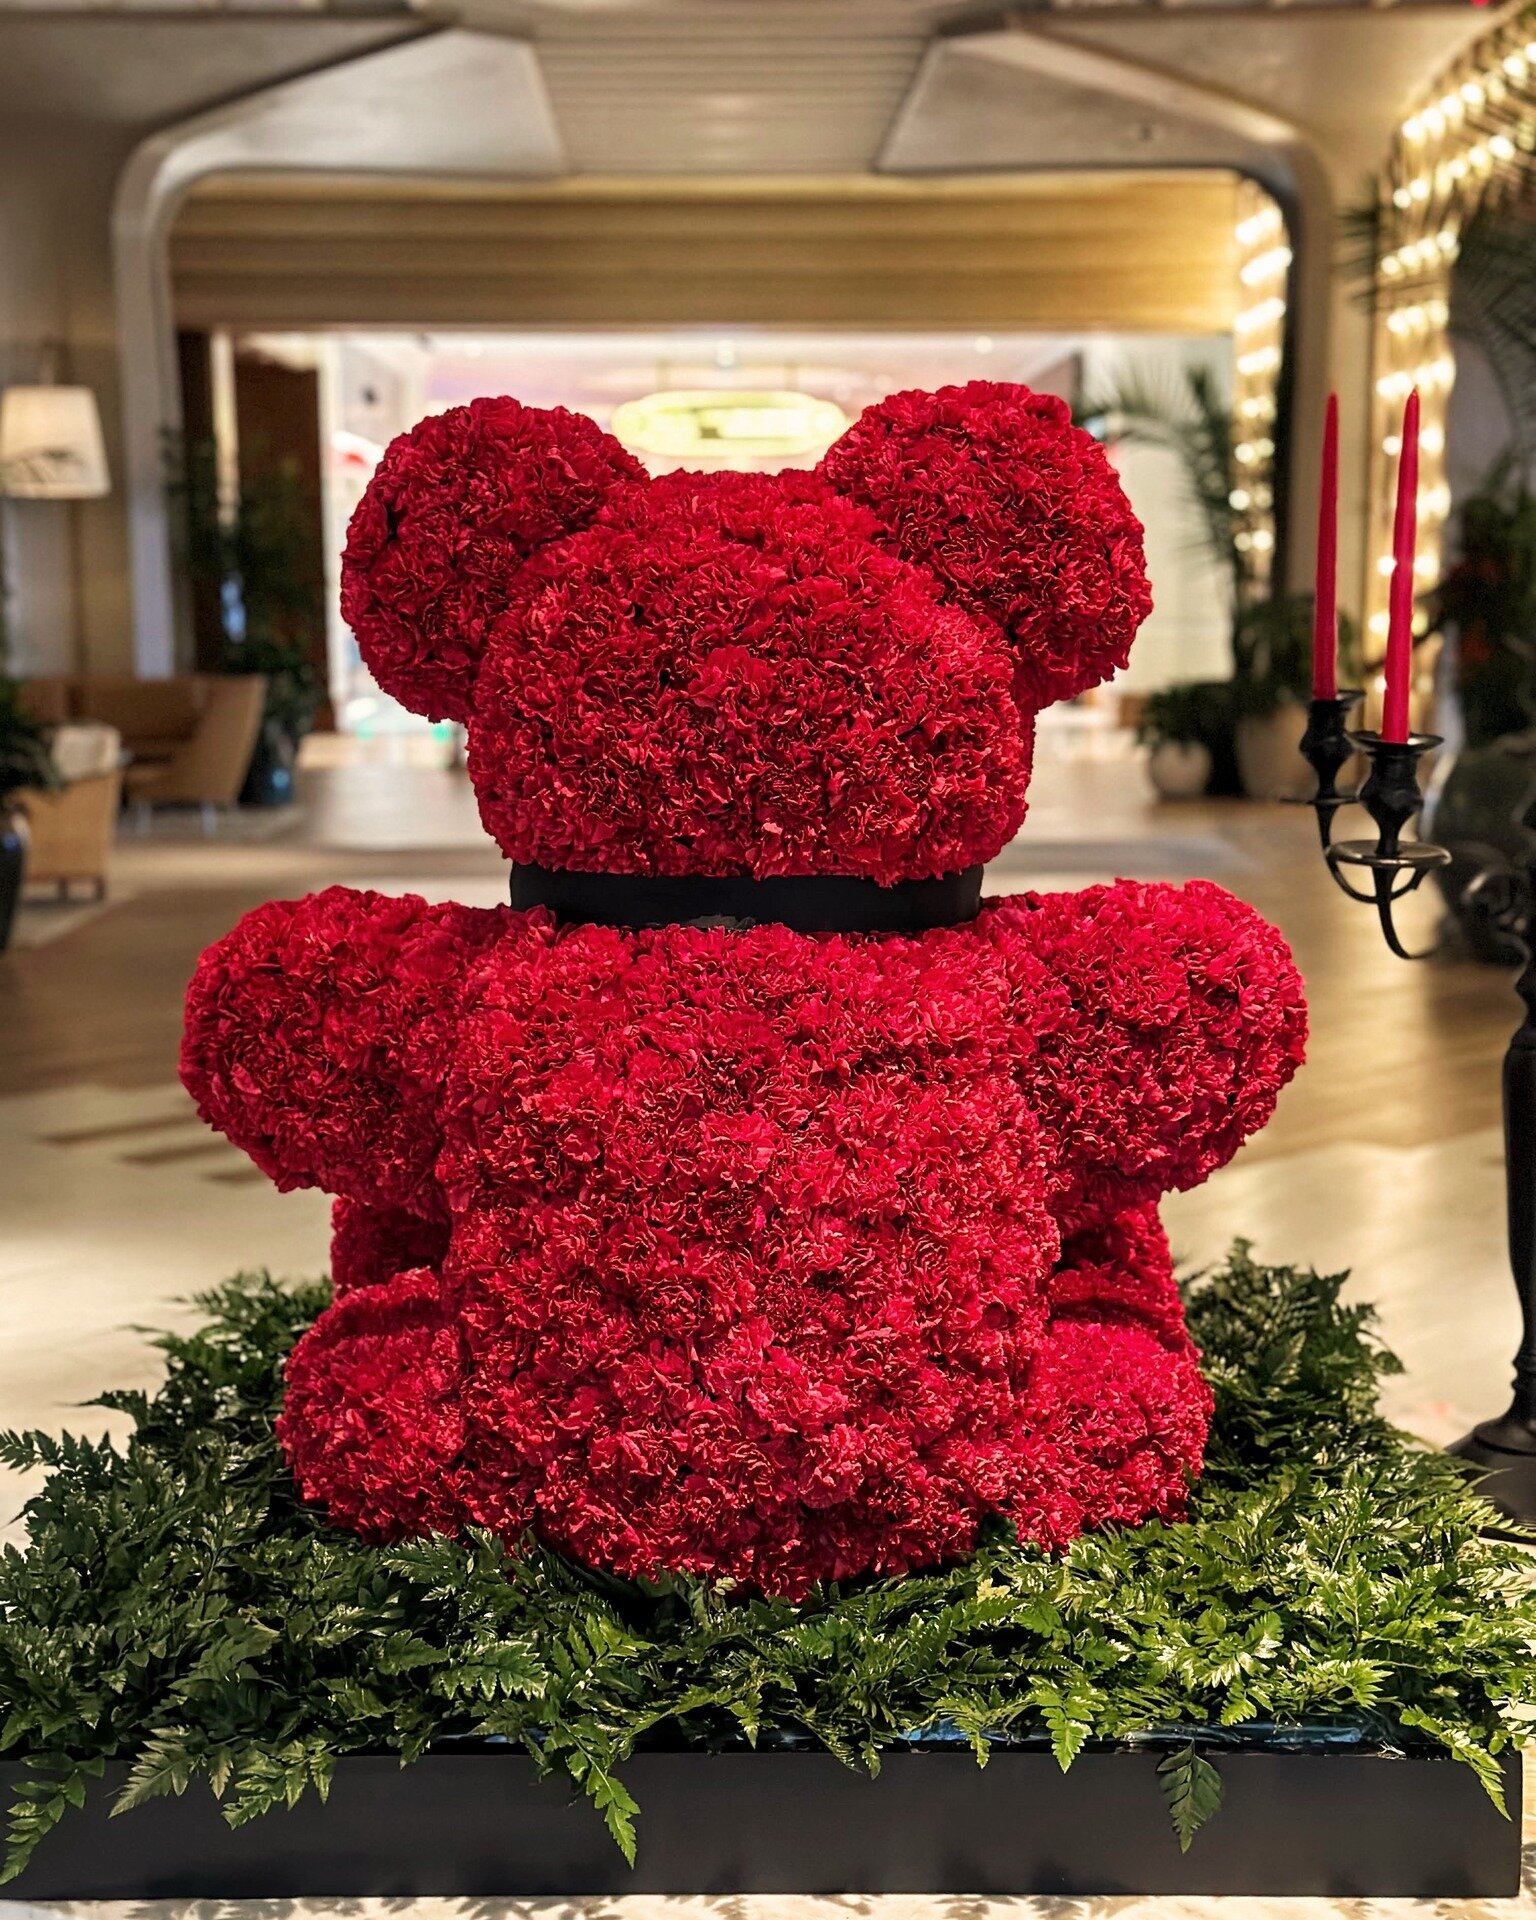 Back by popular demand... 🧸Theodore Teddy ❤️ SWIPE for extra floral hugs. 
.
.
.
.
.
.
.
#caciqueflorals #valentines #valentinesflorals #caciqueinternational #holidayflorals #fridayflorals #florals #hotelflorals #caciquelife #floralwisdom #team #pro